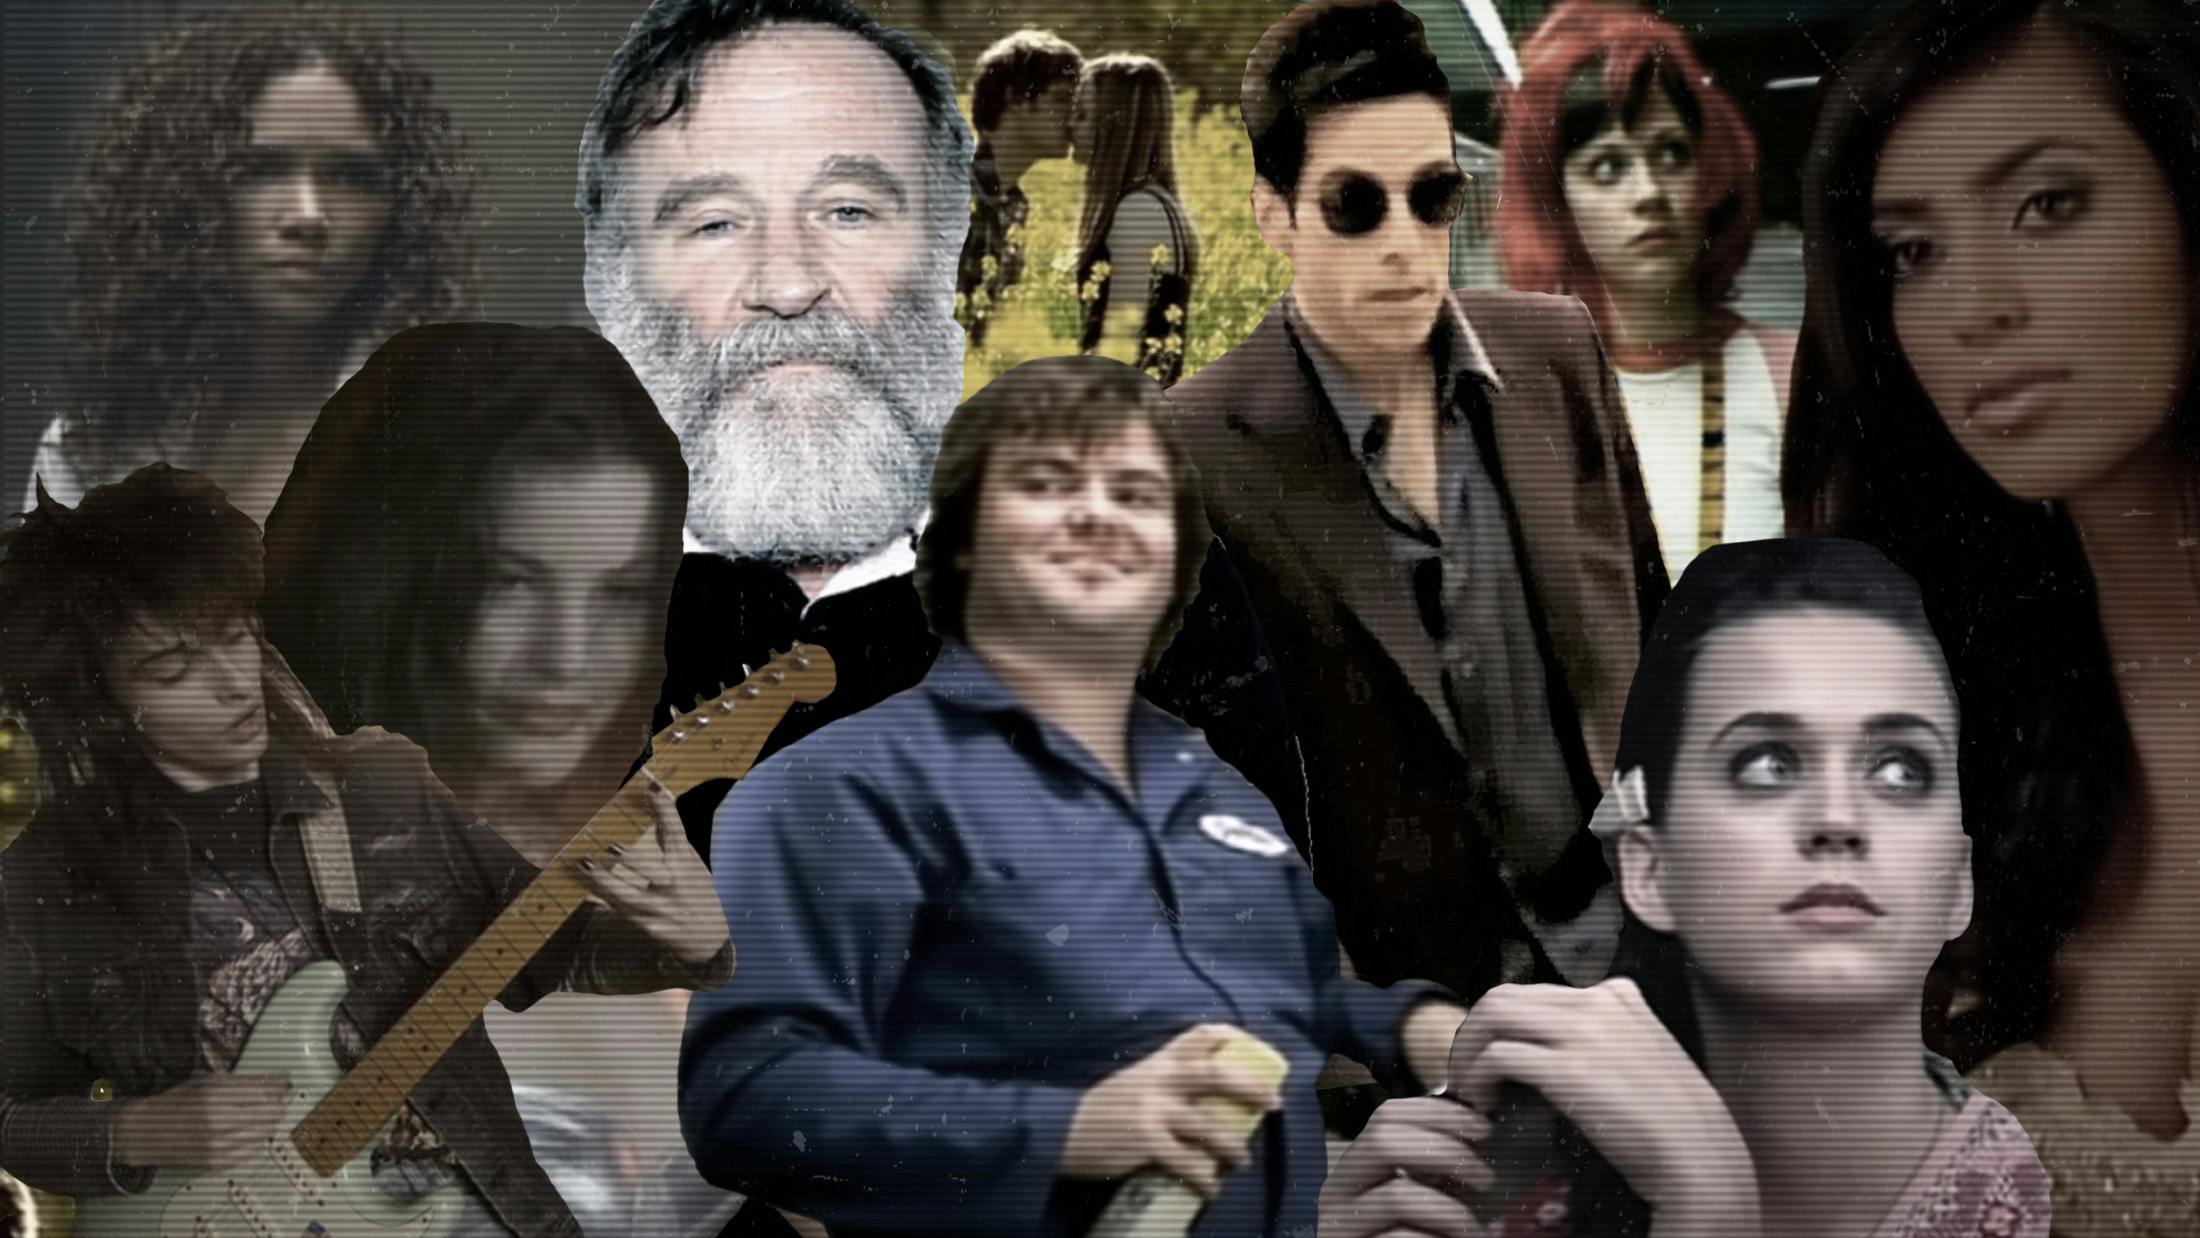 An Exhaustive Look At The Phenomenon Of Celebrity Cameos In Music Videos